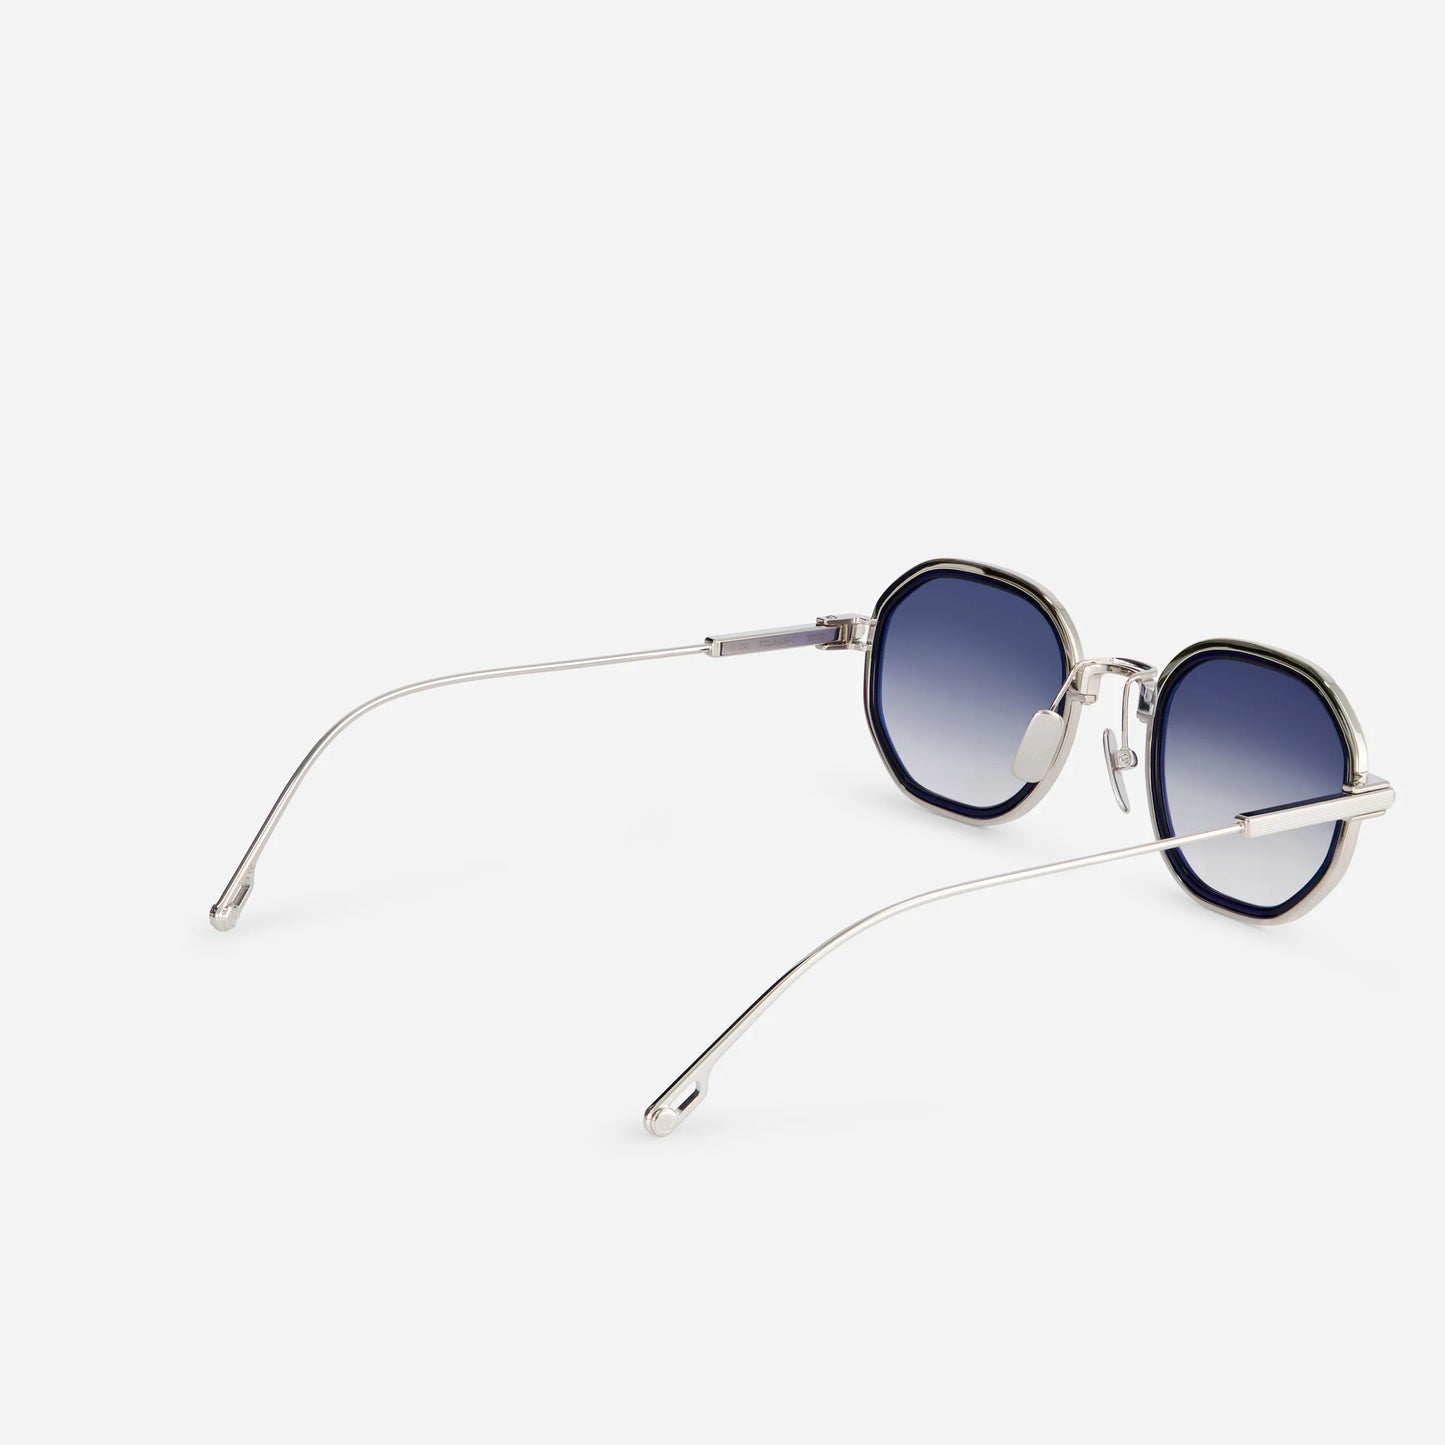 Toliman-T S3301 sunglasses, beautifully designed in pure silver titanium, featuring gray gradient lenses and a captivating blue night insert.